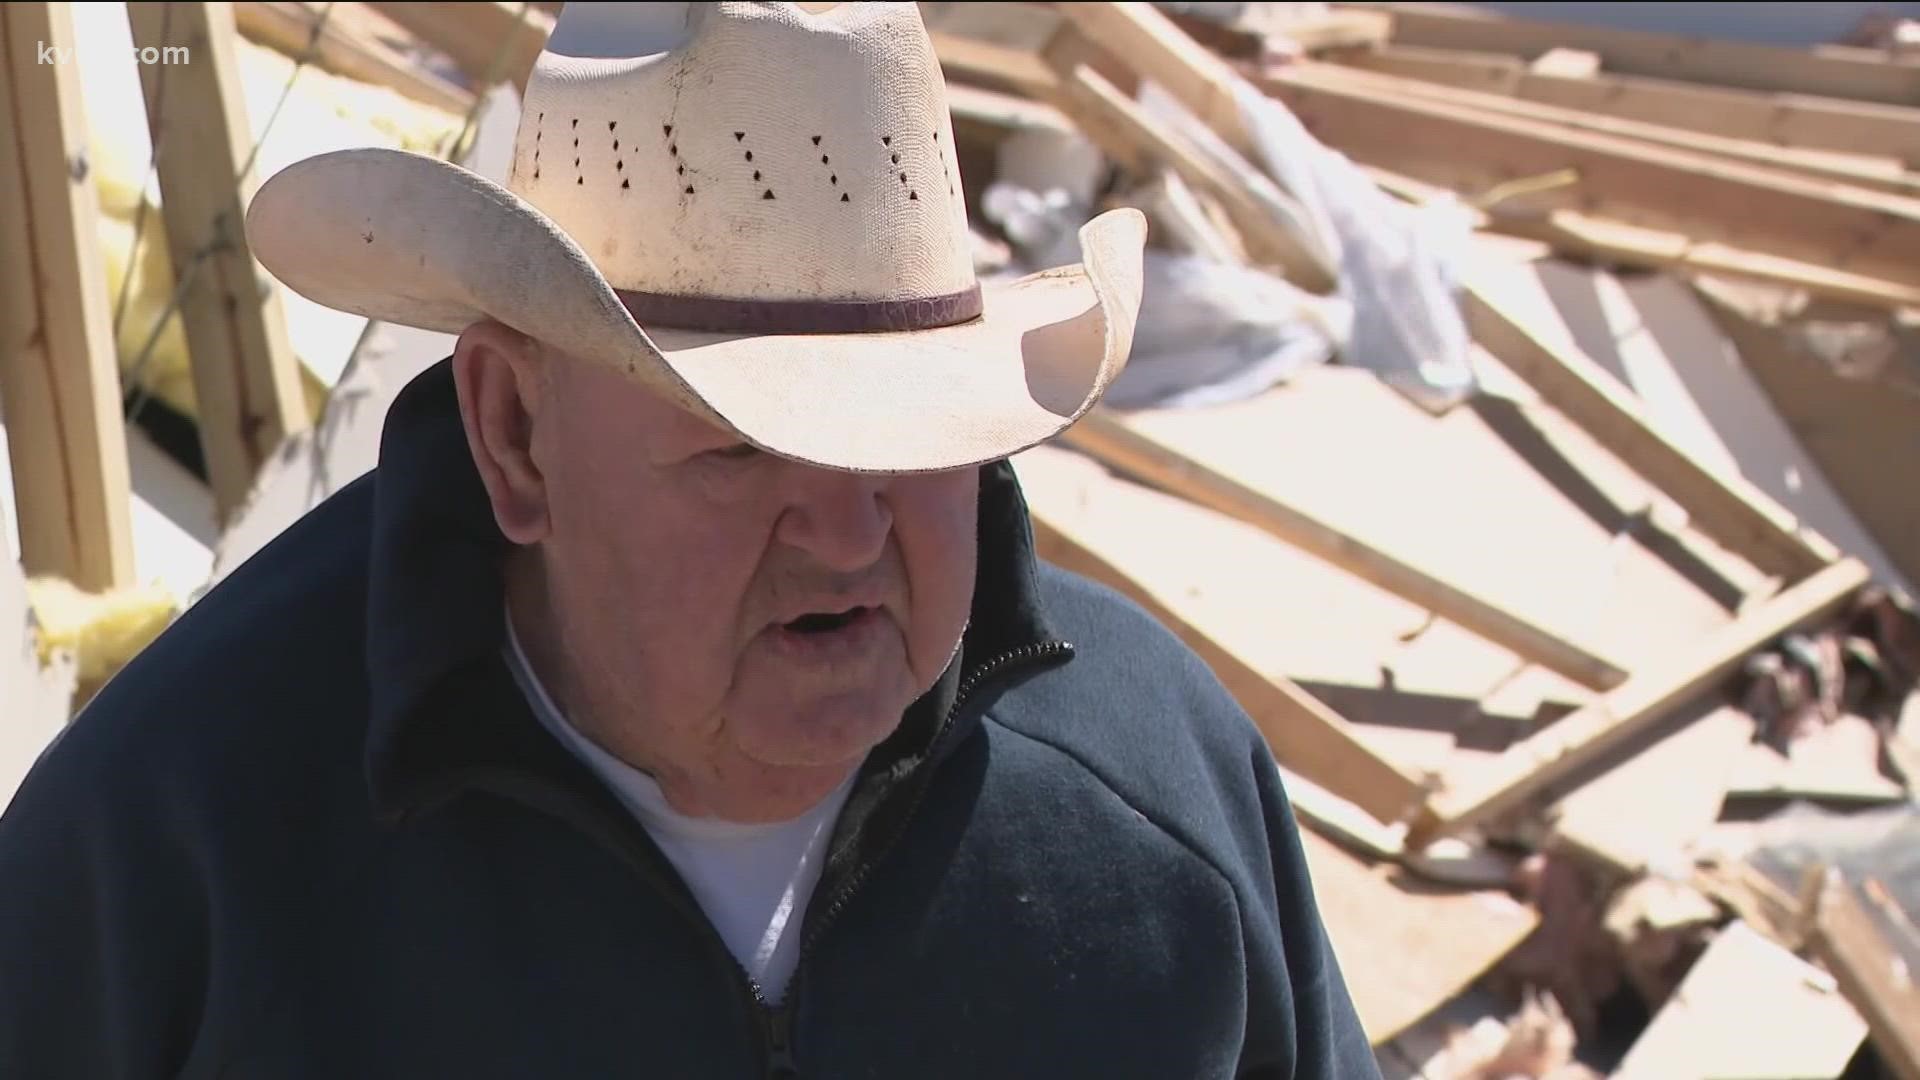 Many homes are destroyed in Elgin. KVUE's Tanvi Varma spoke to people affected by the damage.